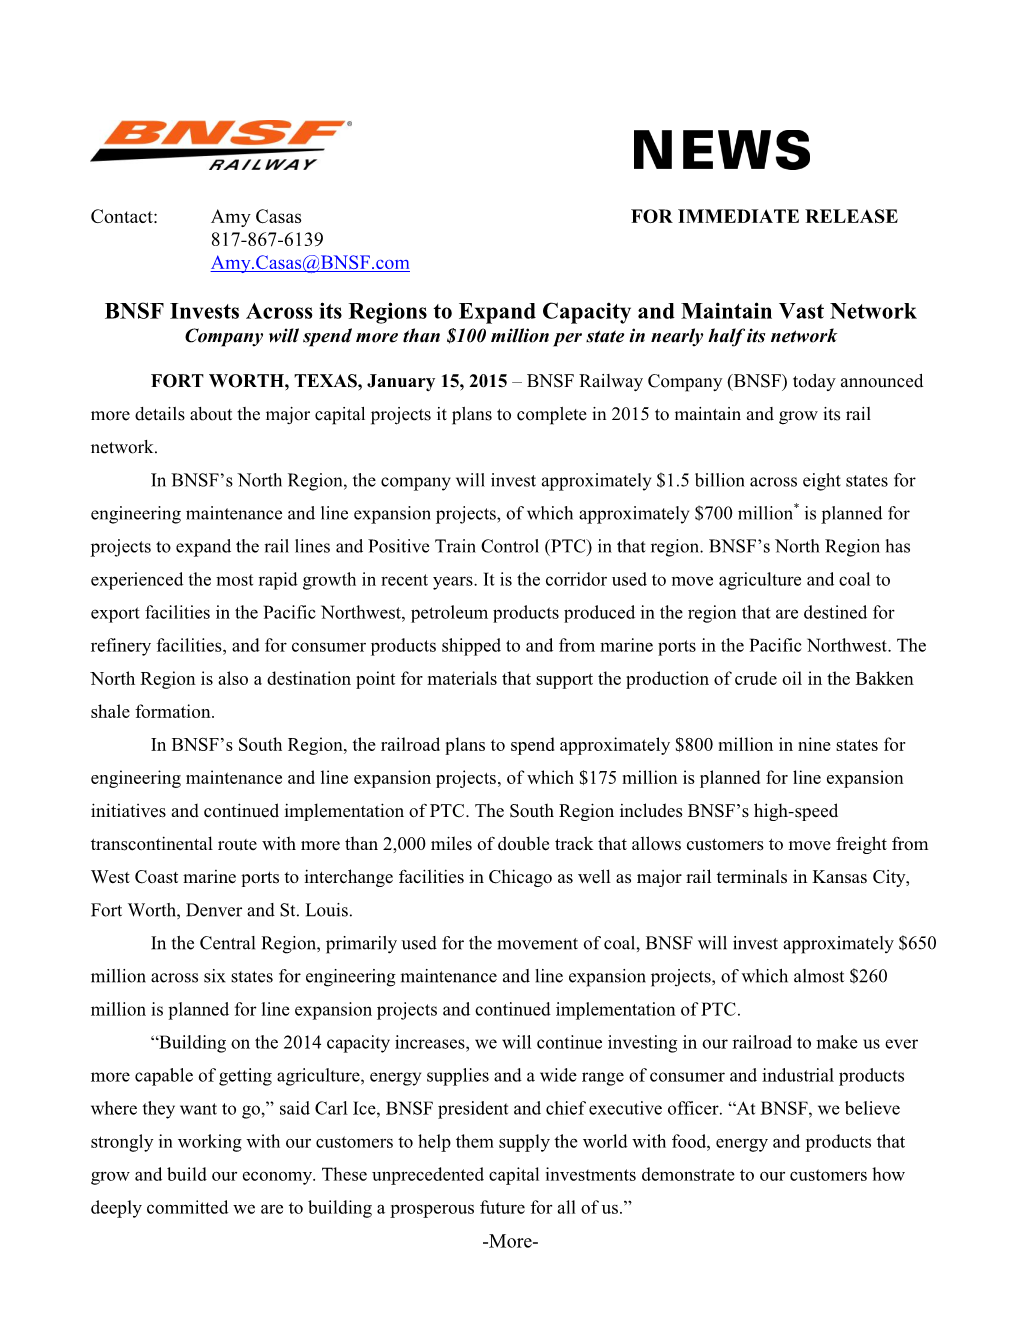 BNSF Invests Across Its Regions to Expand Capacity and Maintain Vast Network Company Will Spend More Than $100 Million Per State in Nearly Half Its Network